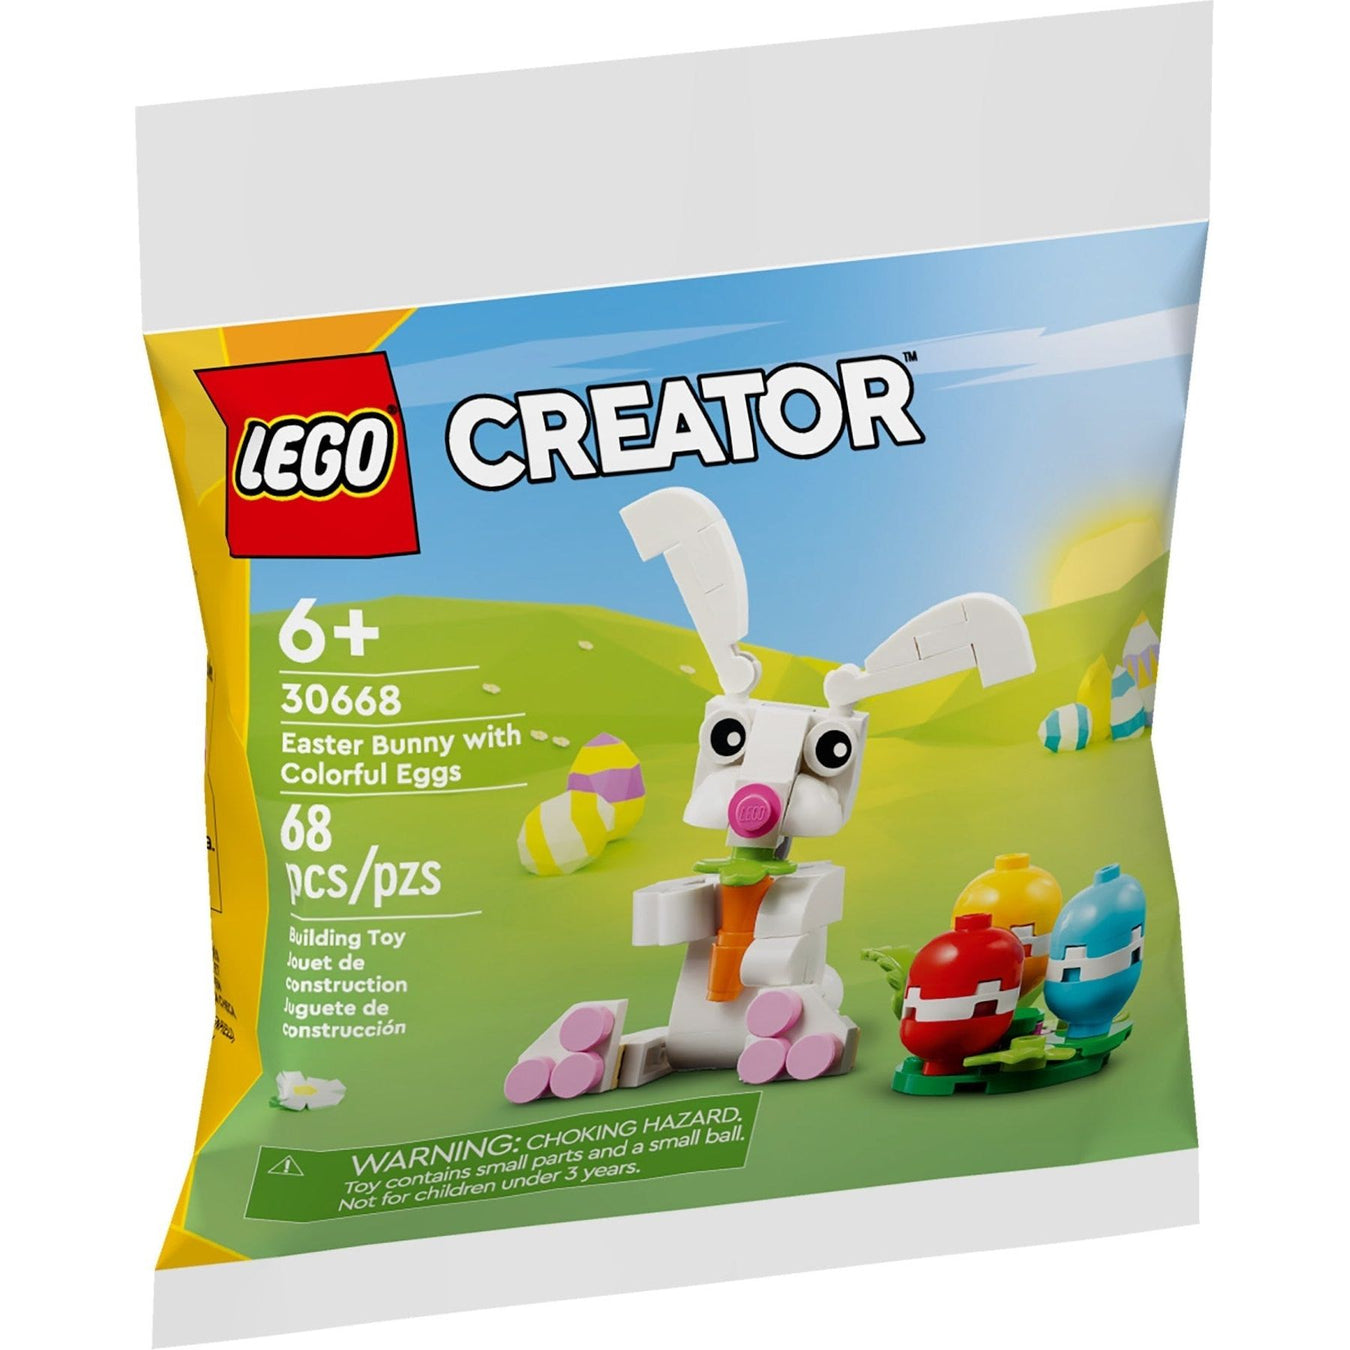 3 for £10 LEGO Polybags